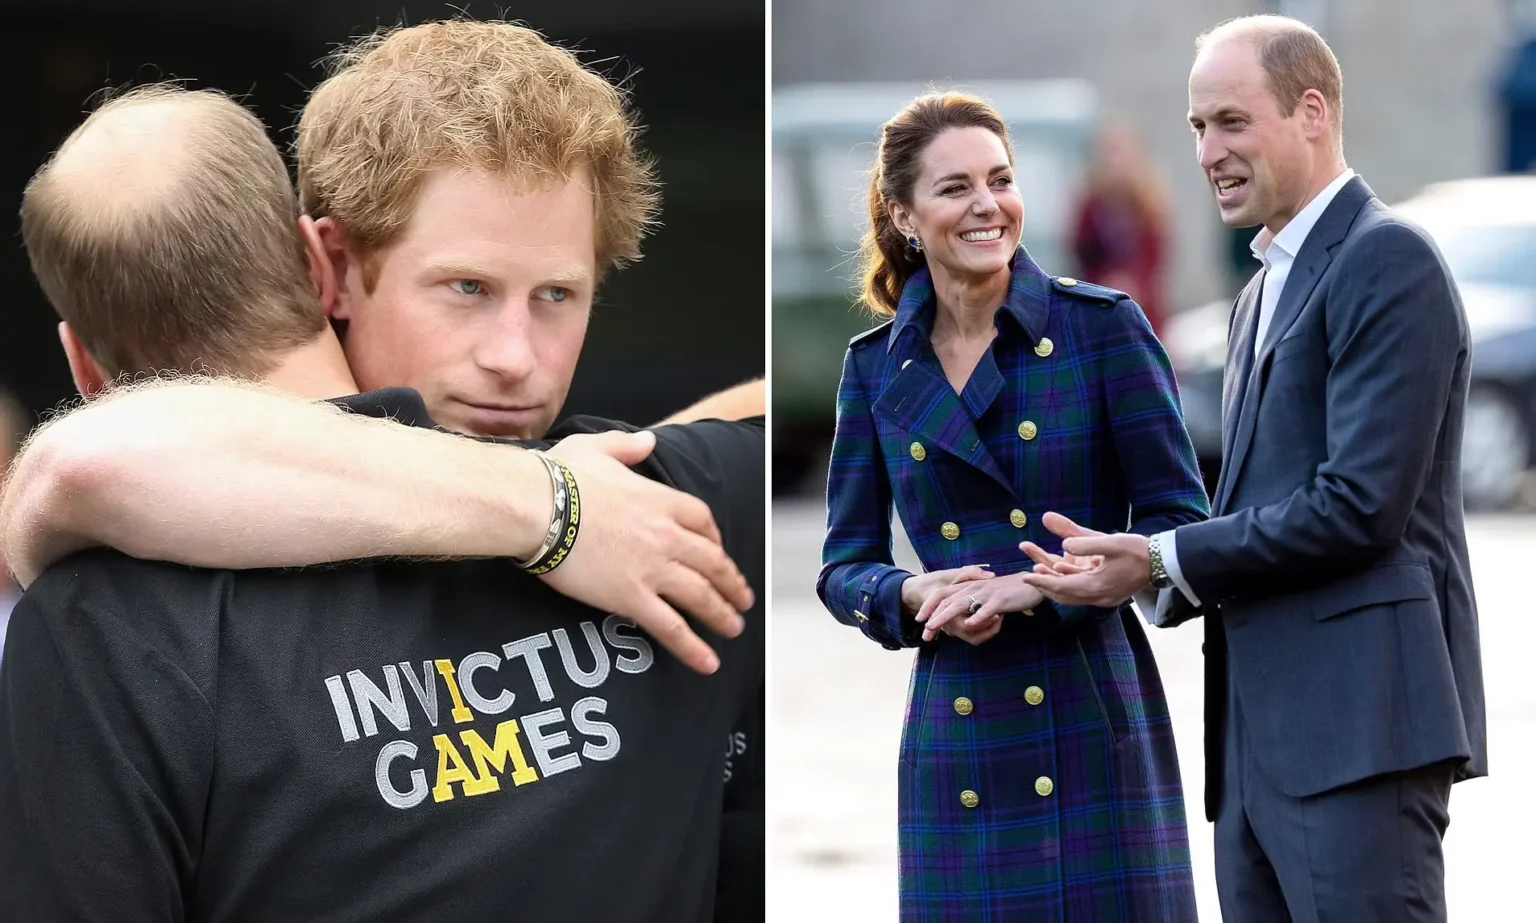 prince-william-kate-middletons-contribution-in-the-success-of-the-invictus-games-is-forgotten